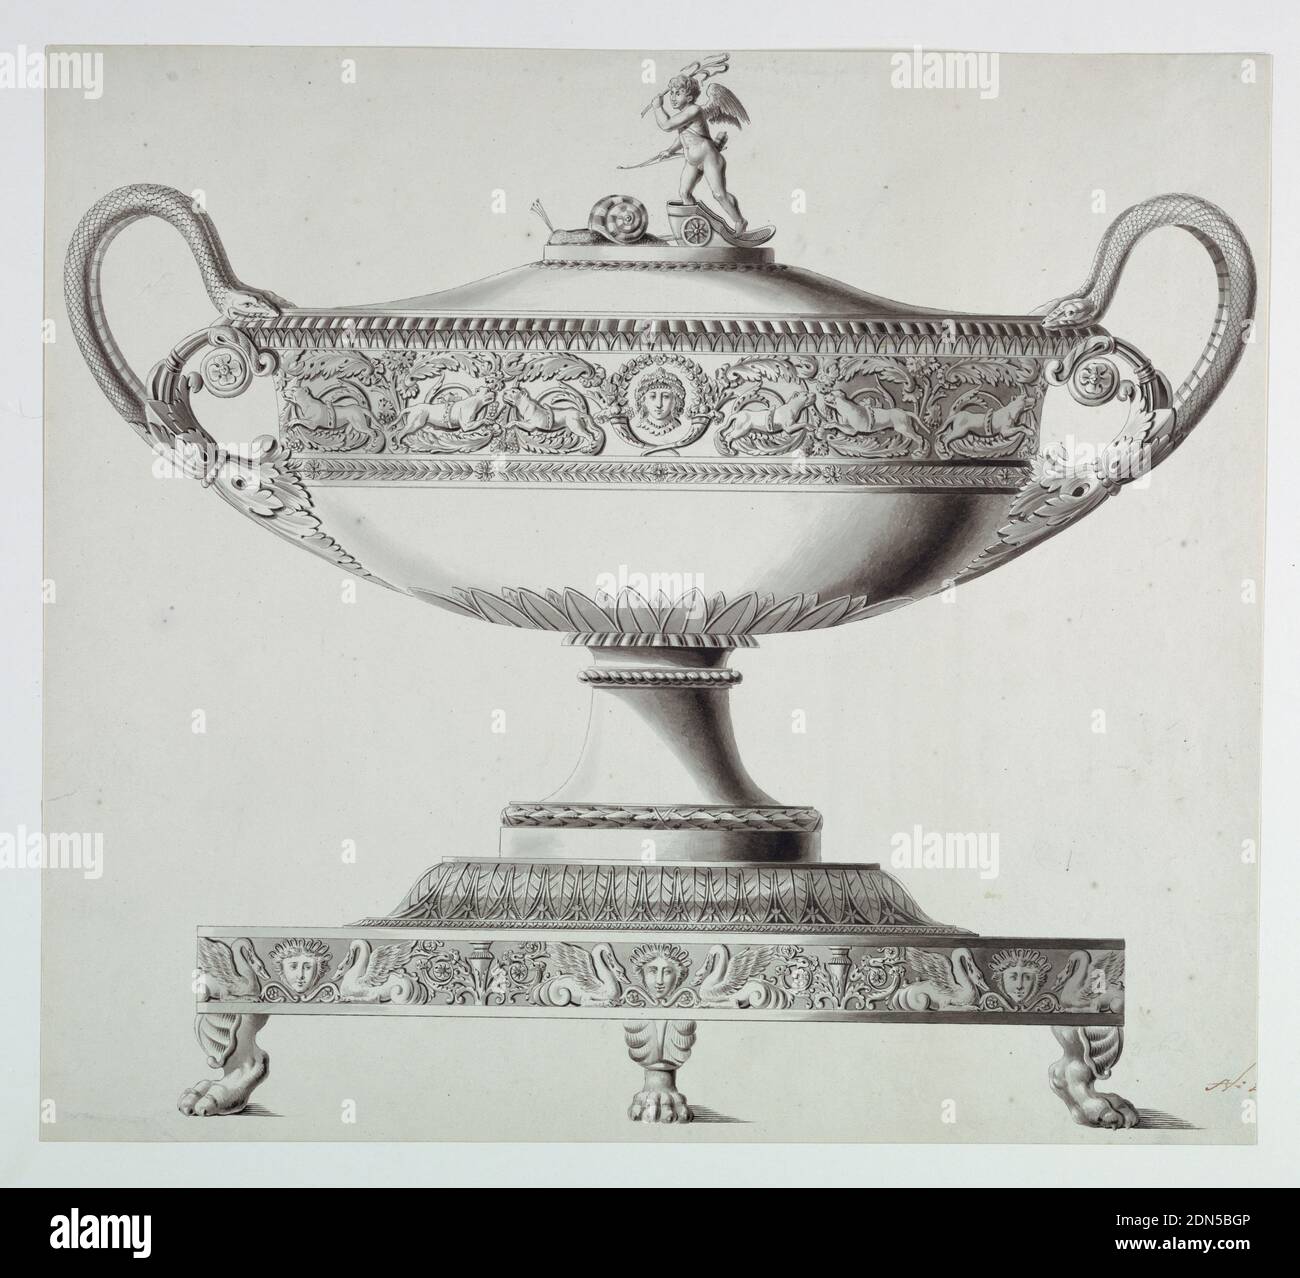 Design for a Tureen, Joseph Anton Seethaler II, German, 1799–1868, Pen and ink, brush and wash on paper, The body is banded by an arabesque frieze with lions and a medallion portrait in the center. The handles are formed by paired snakes issuing from a bound cluster of leaves. The finial is banded by a frieze of arabesques, vases, half-fish, half-swans, and masks, and rests on animals' feet. Lower right (in red ink): 'No 4 [?]' (cut off), Augsburg, Germany, 1825–1835, metalwork, Drawing Stock Photo